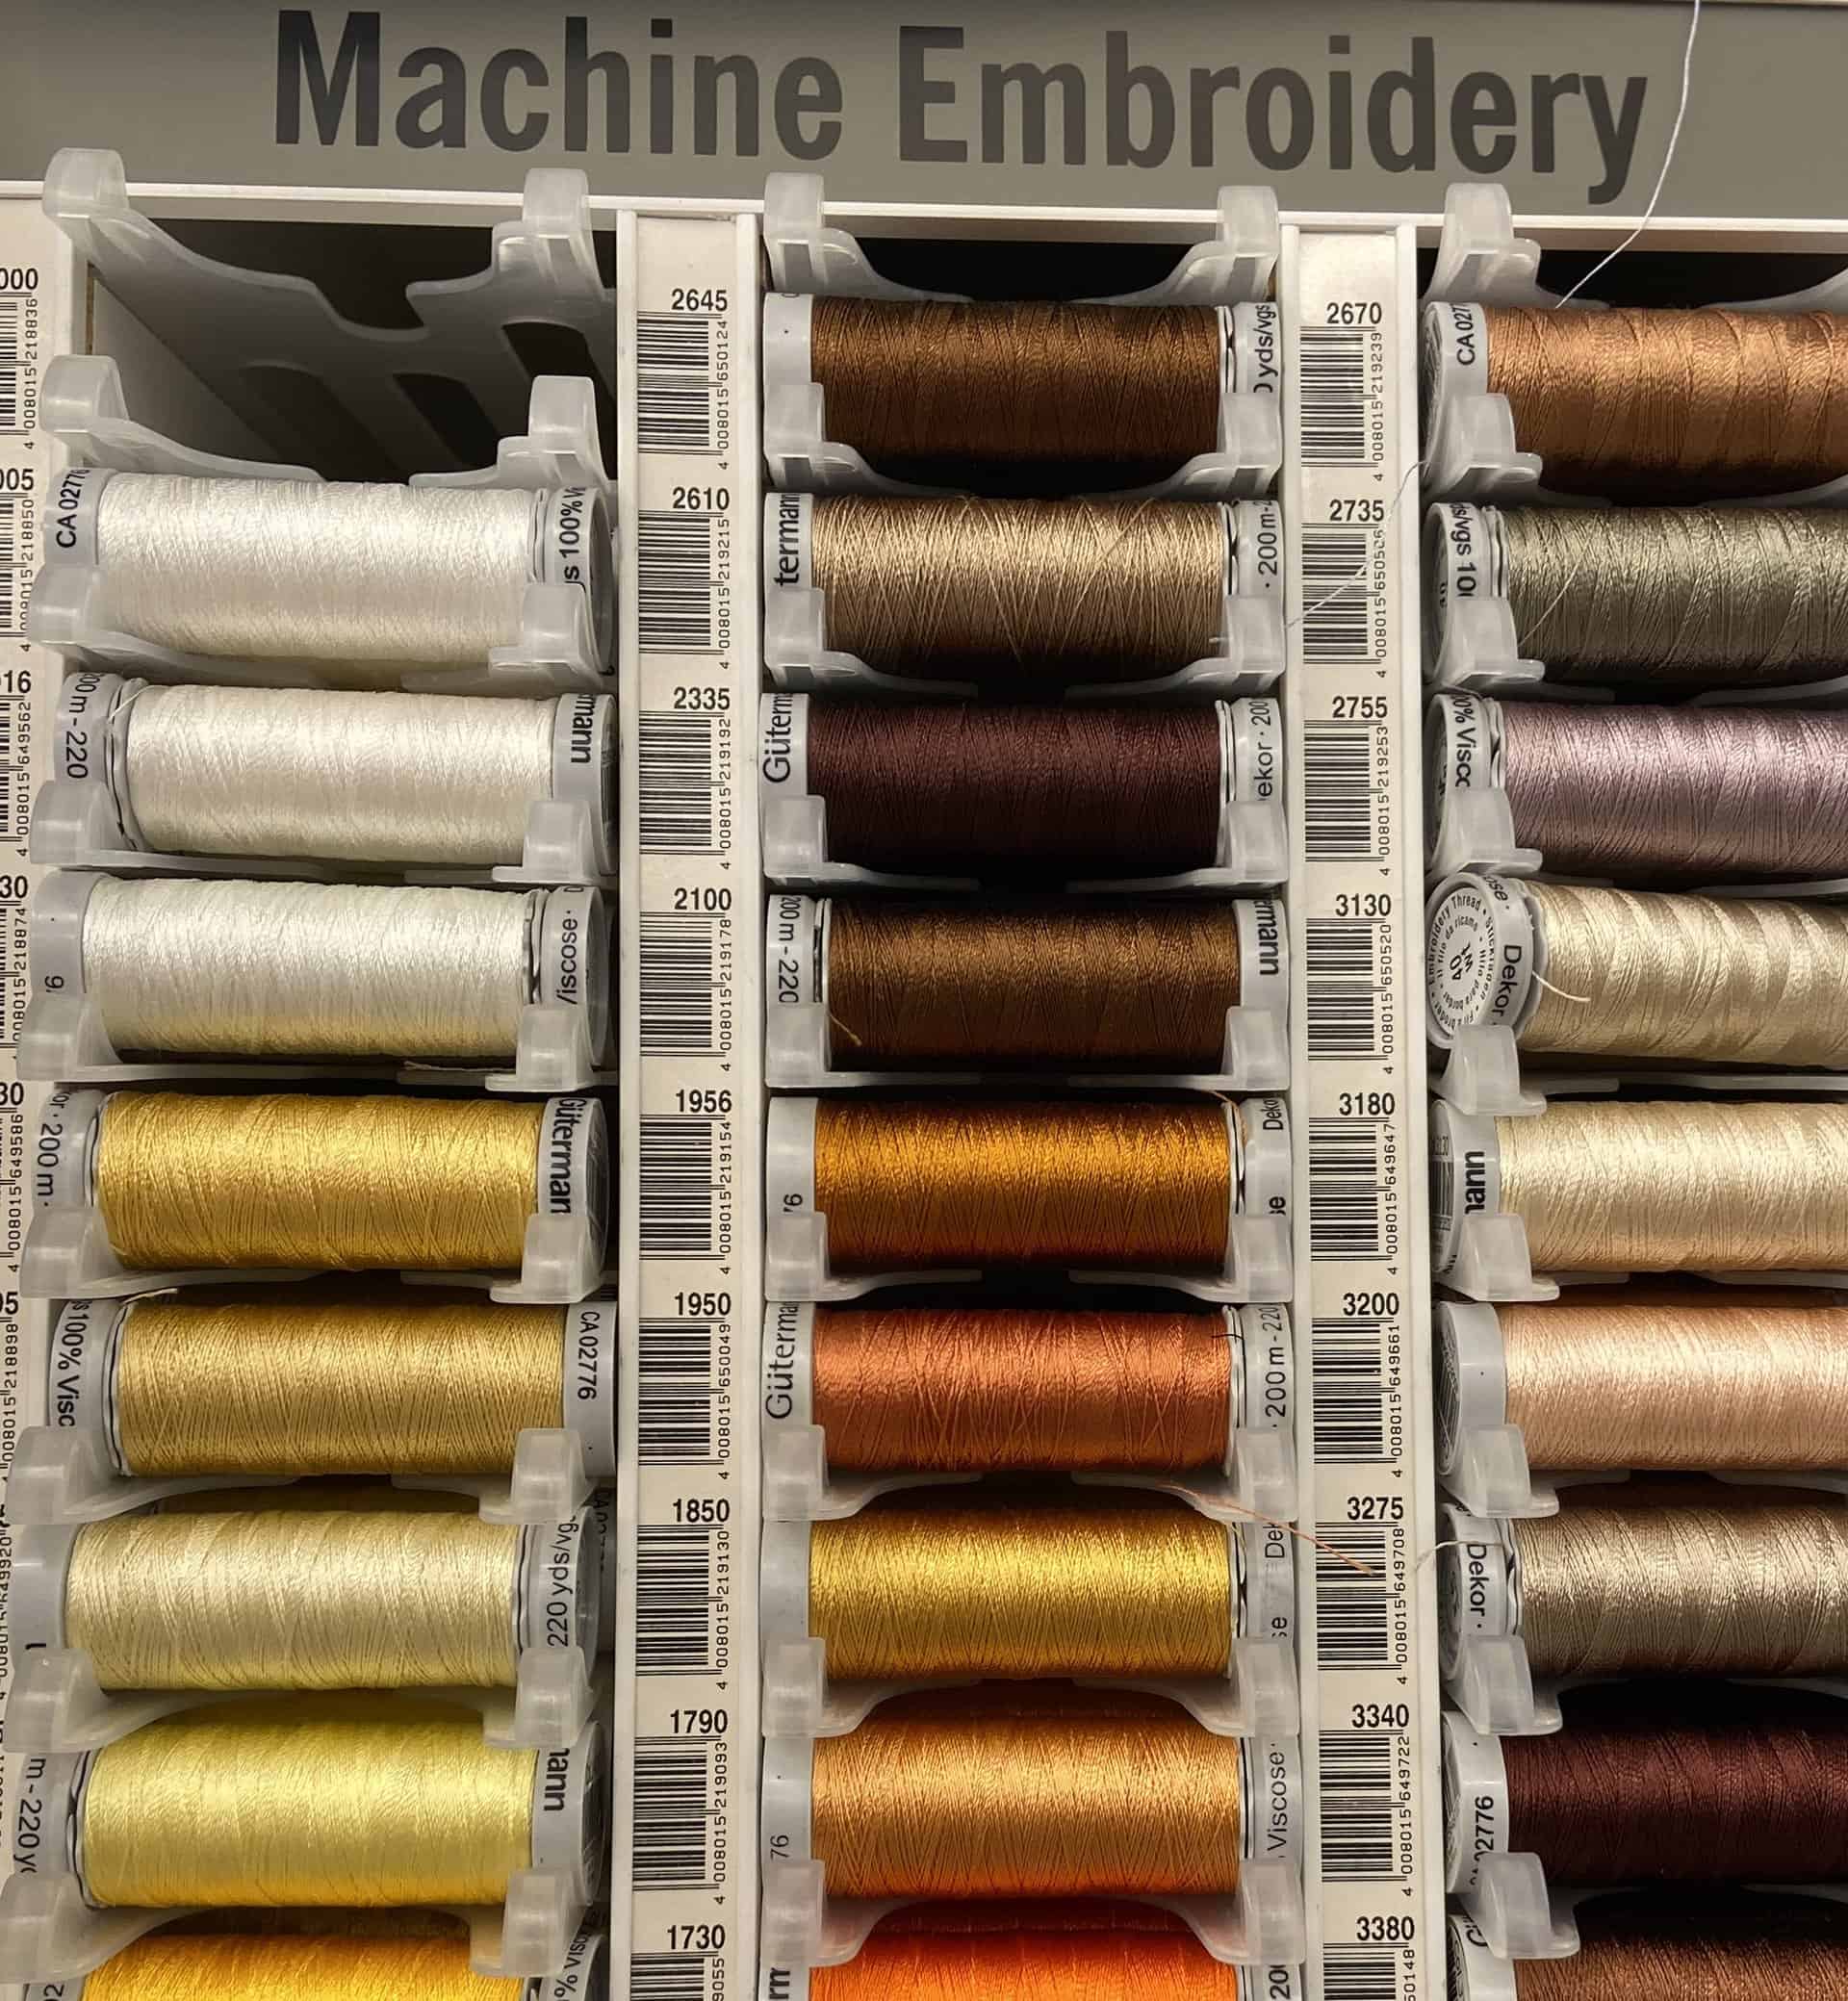 Which Sewing Thread To Use - The right thread for the job - Caboodle  Textiles